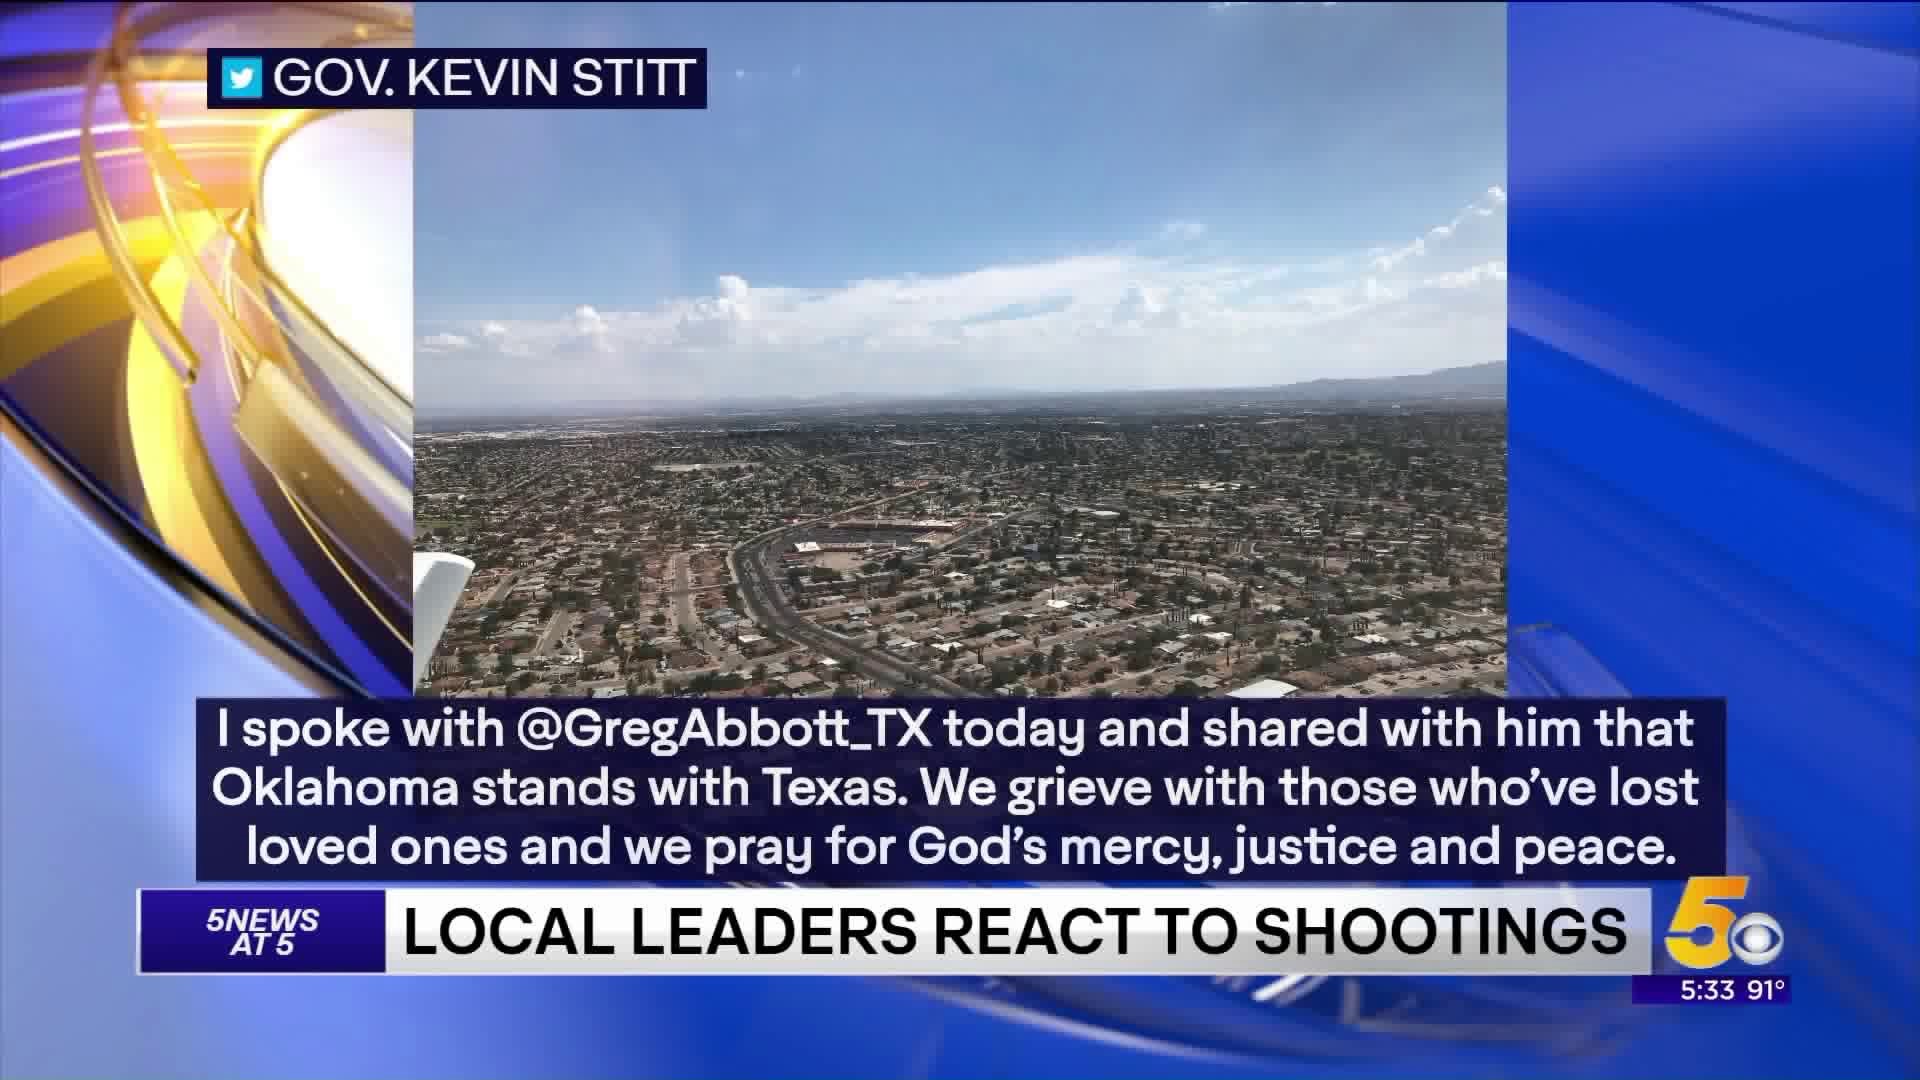 Local Leaders Respond To Mass Shootings Over The Weekend